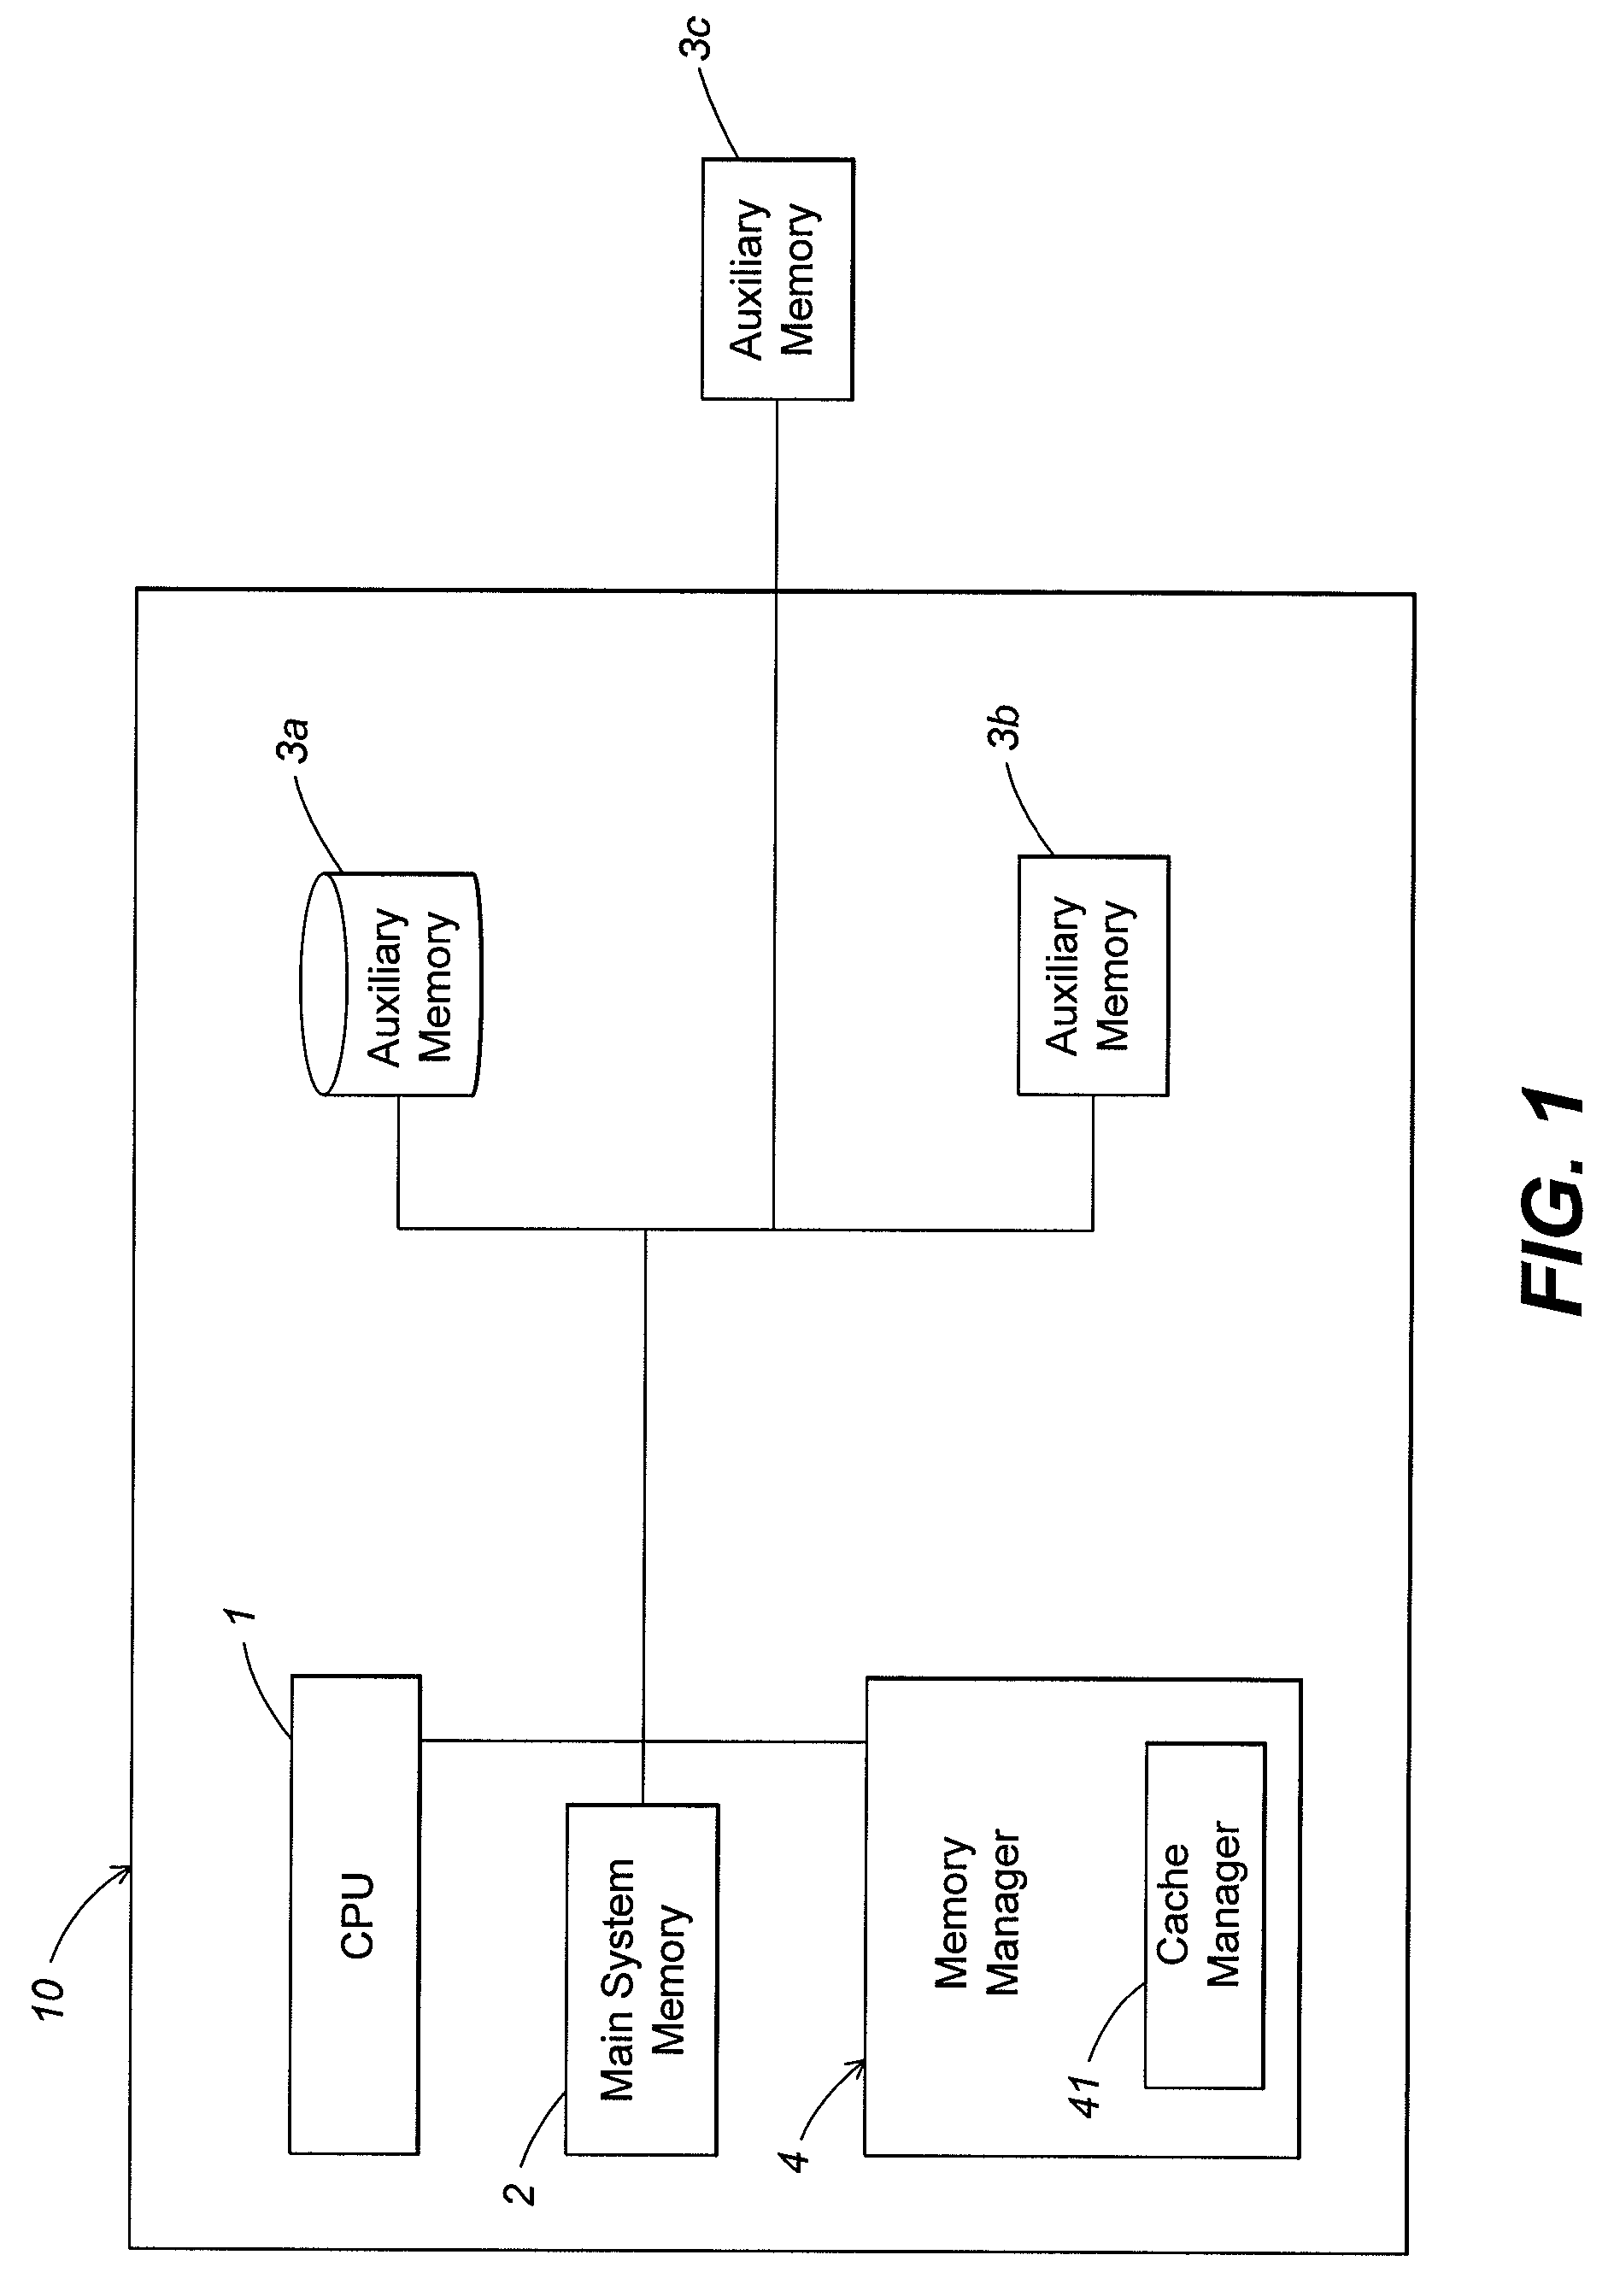 Management of external memory functioning as virtual cache